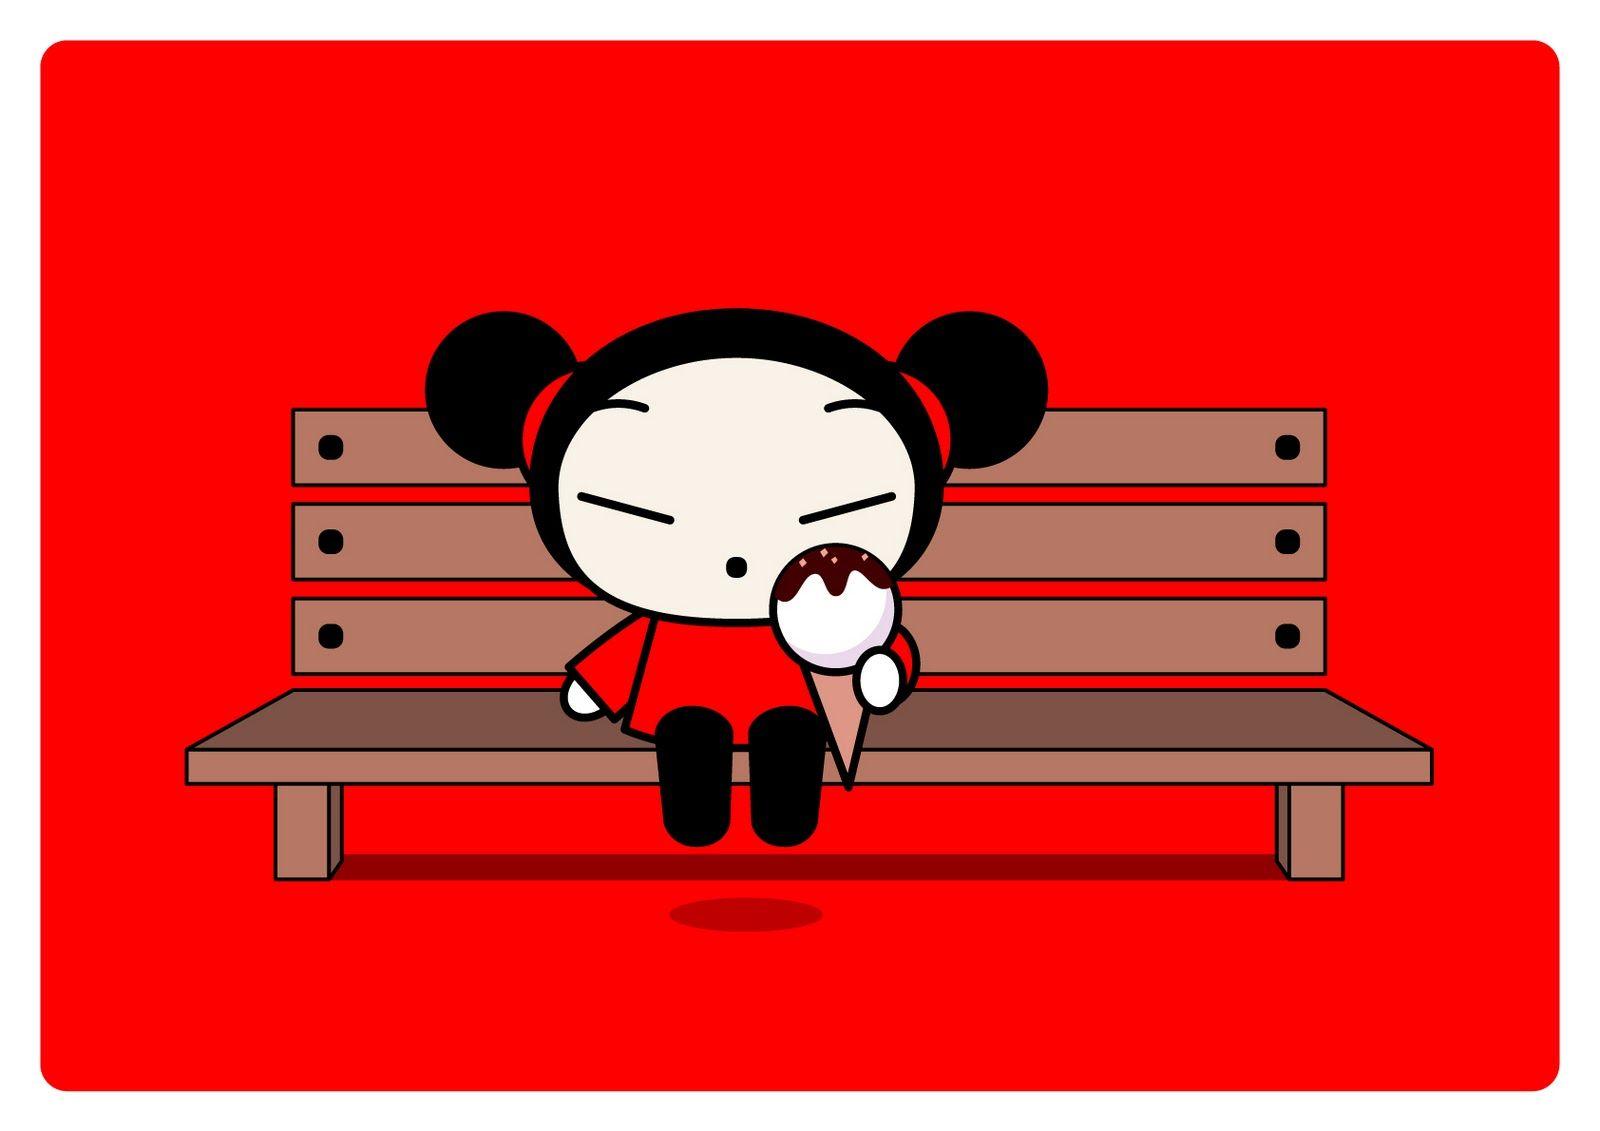 Images for Pucca.